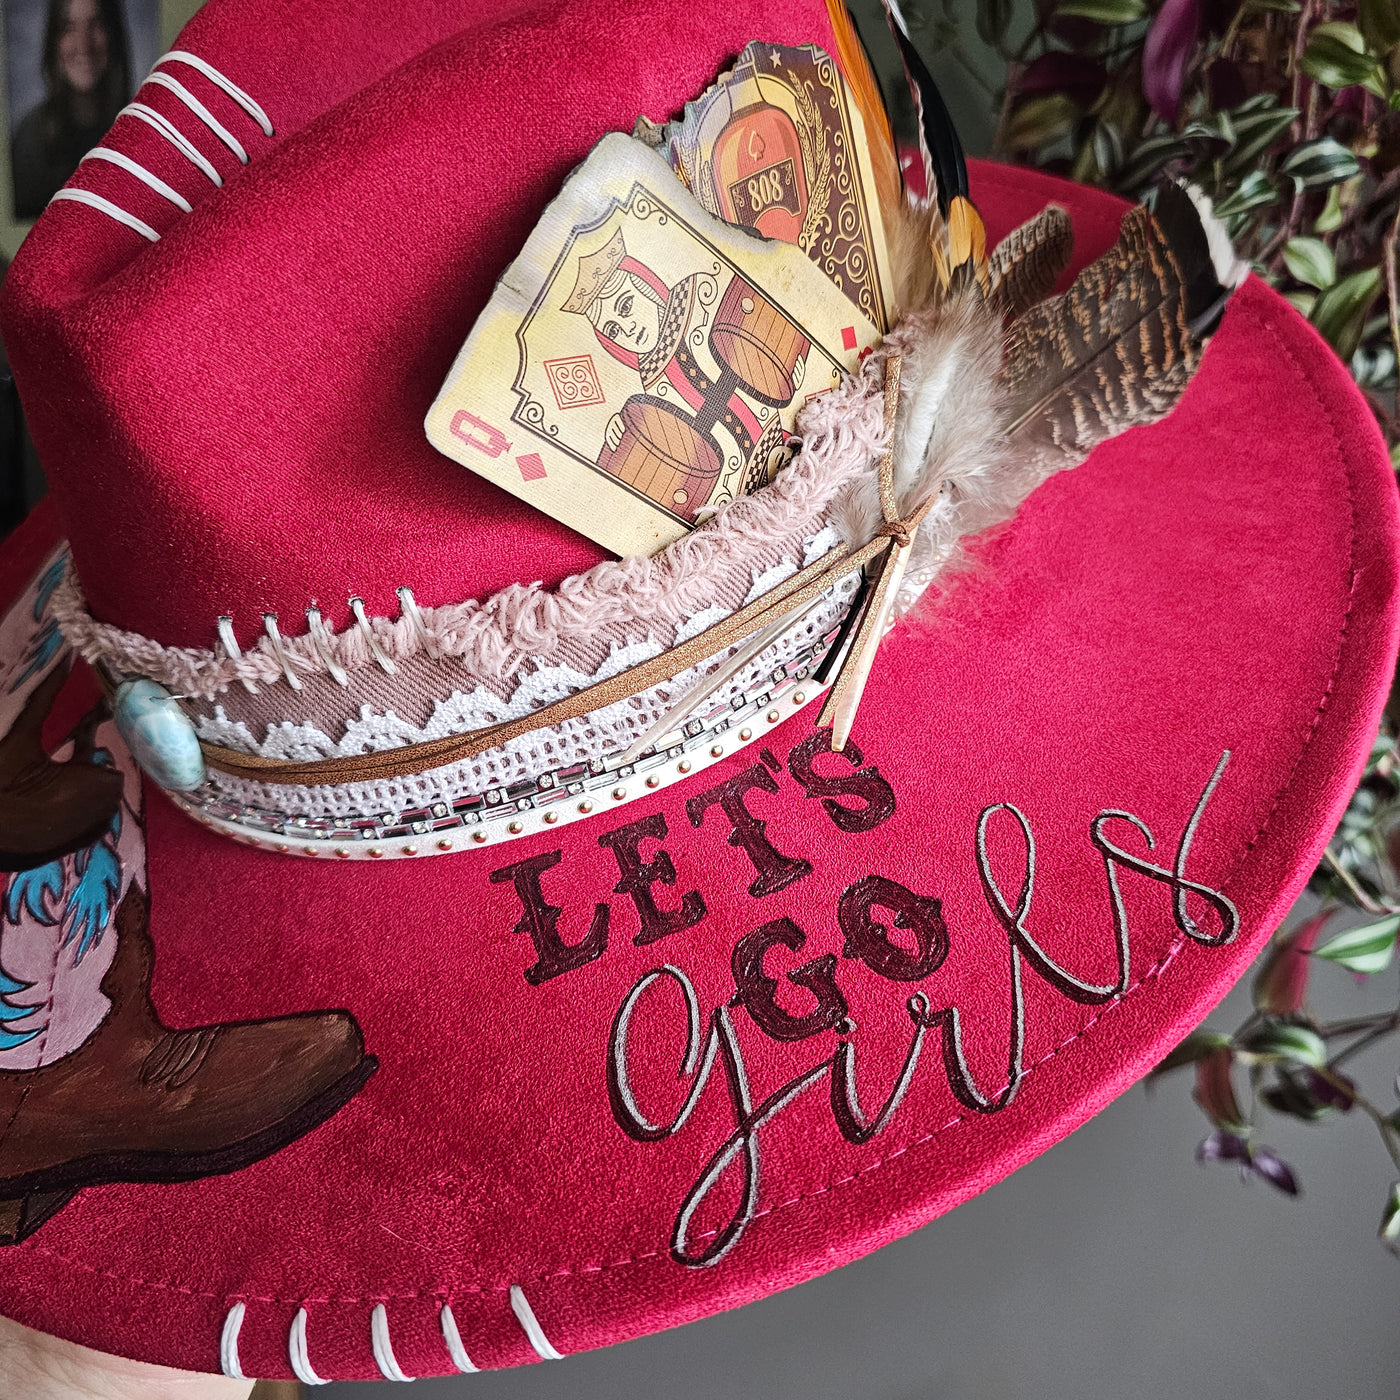 Let's Go Girls + Genuine Larimar Stone || Cranberry Fuschia Suede Burned and Painted Wide Brim Hat